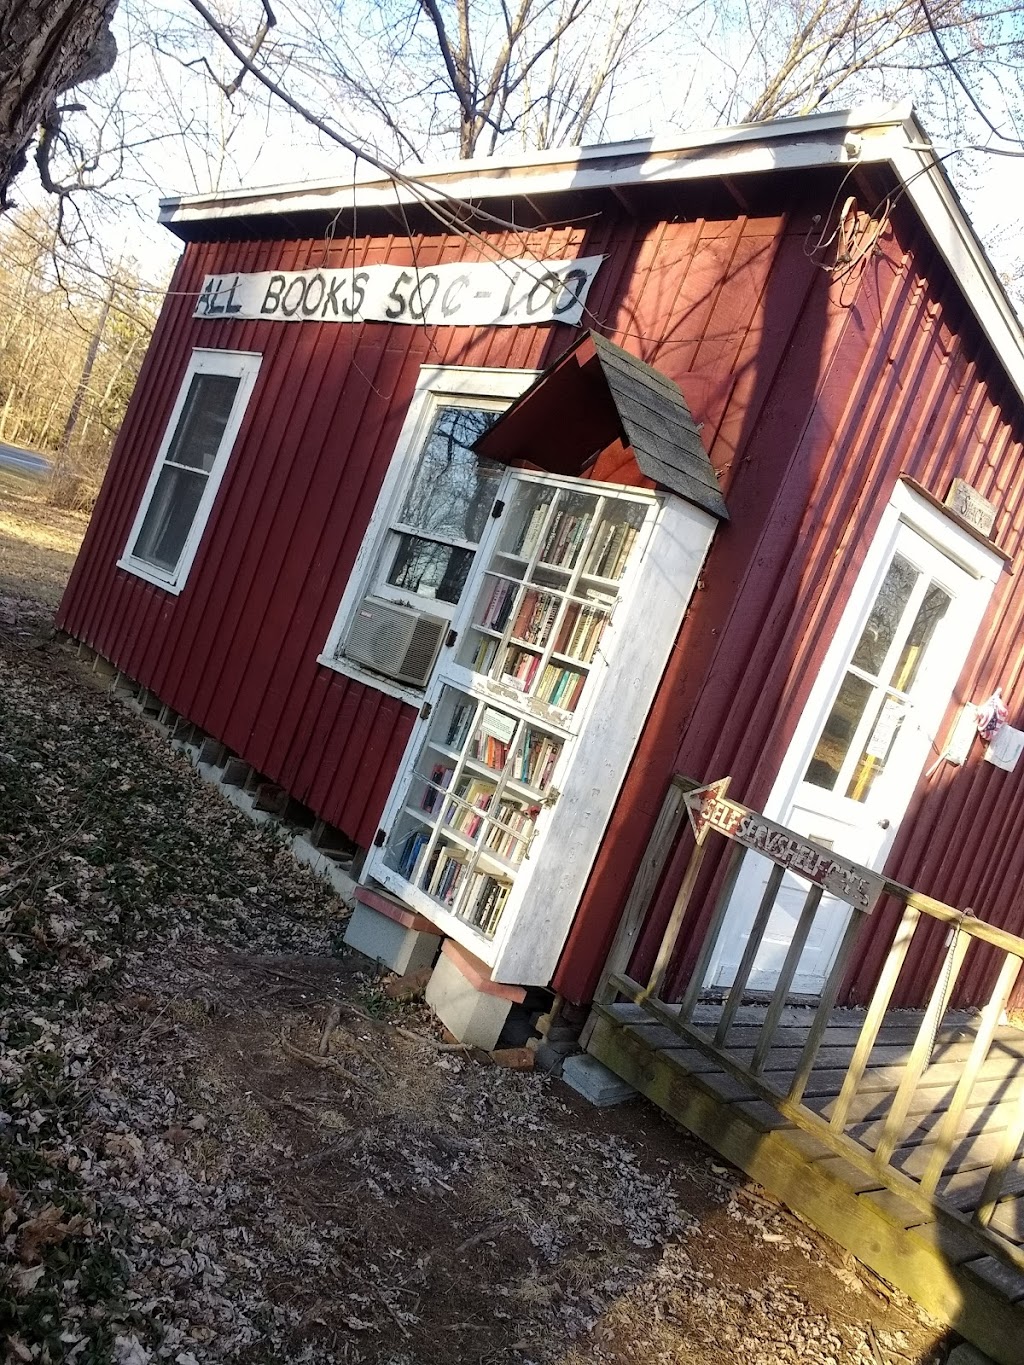 Little Red Book Shack | 2710 US-9, Hudson, NY 12534 | Phone: (518) 537-5027